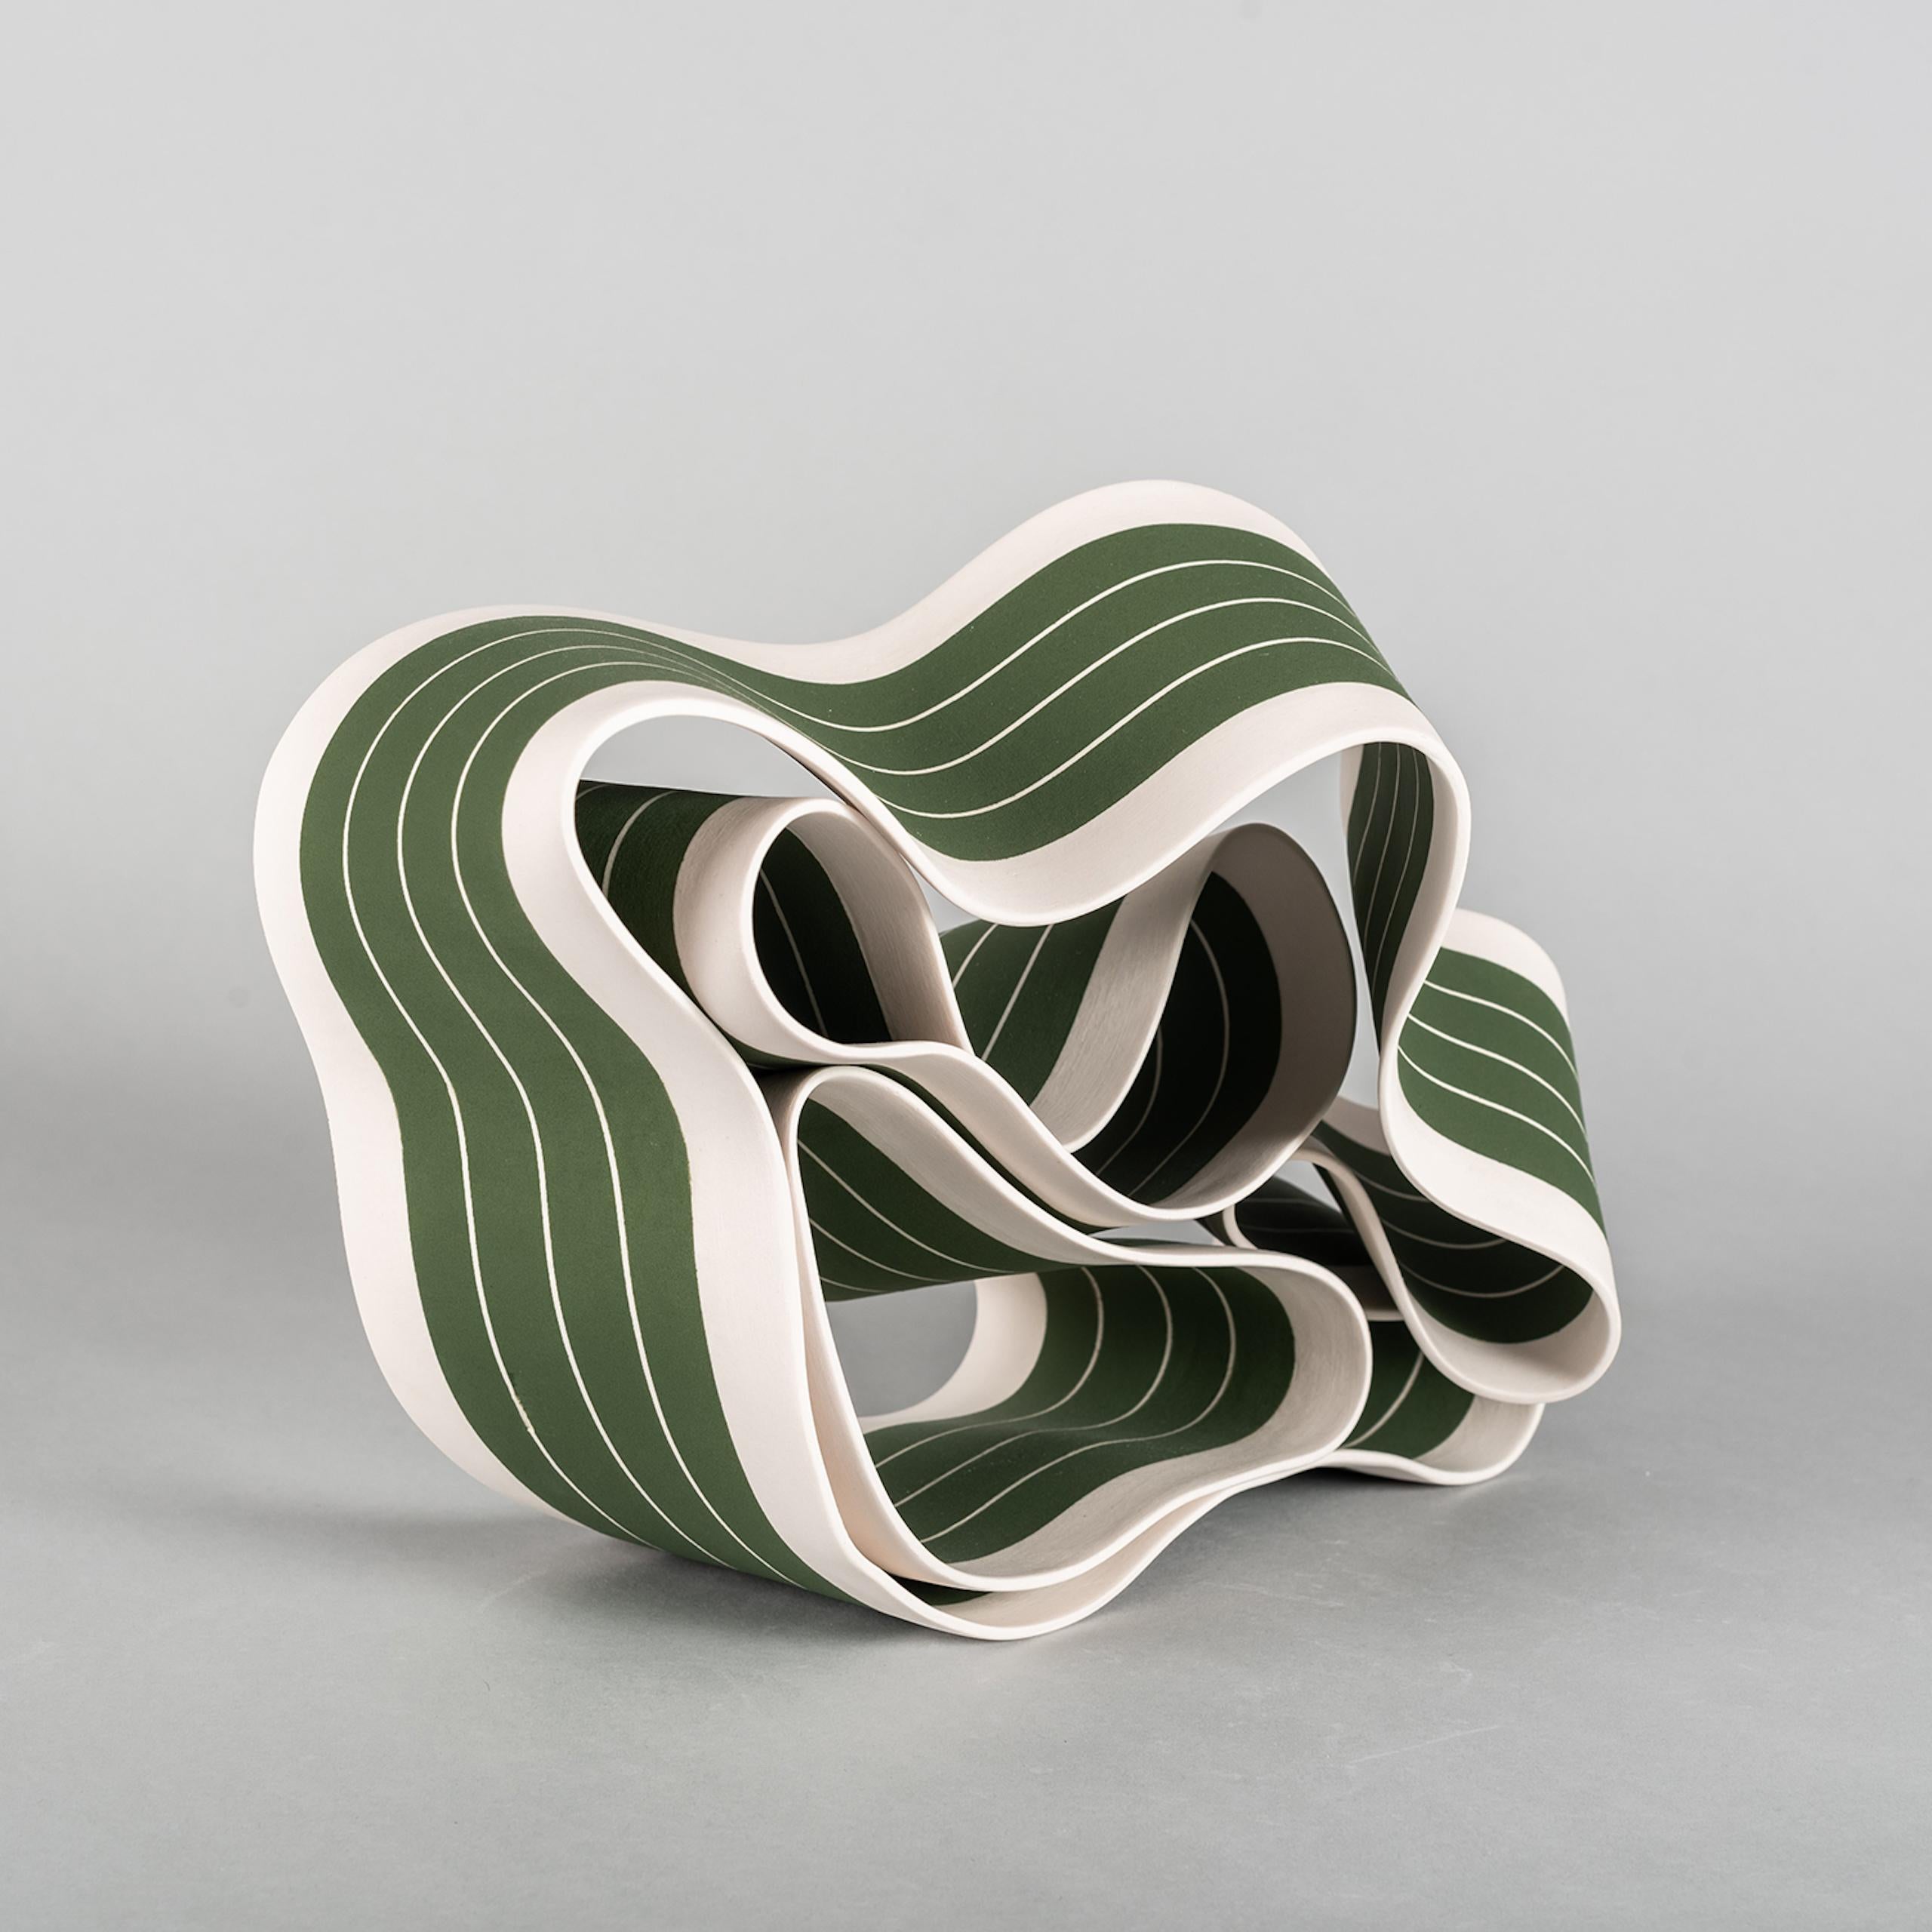 Folding in Motion 4 by Simcha Even-Chen - Porcelain sculpture, green lines For Sale 1